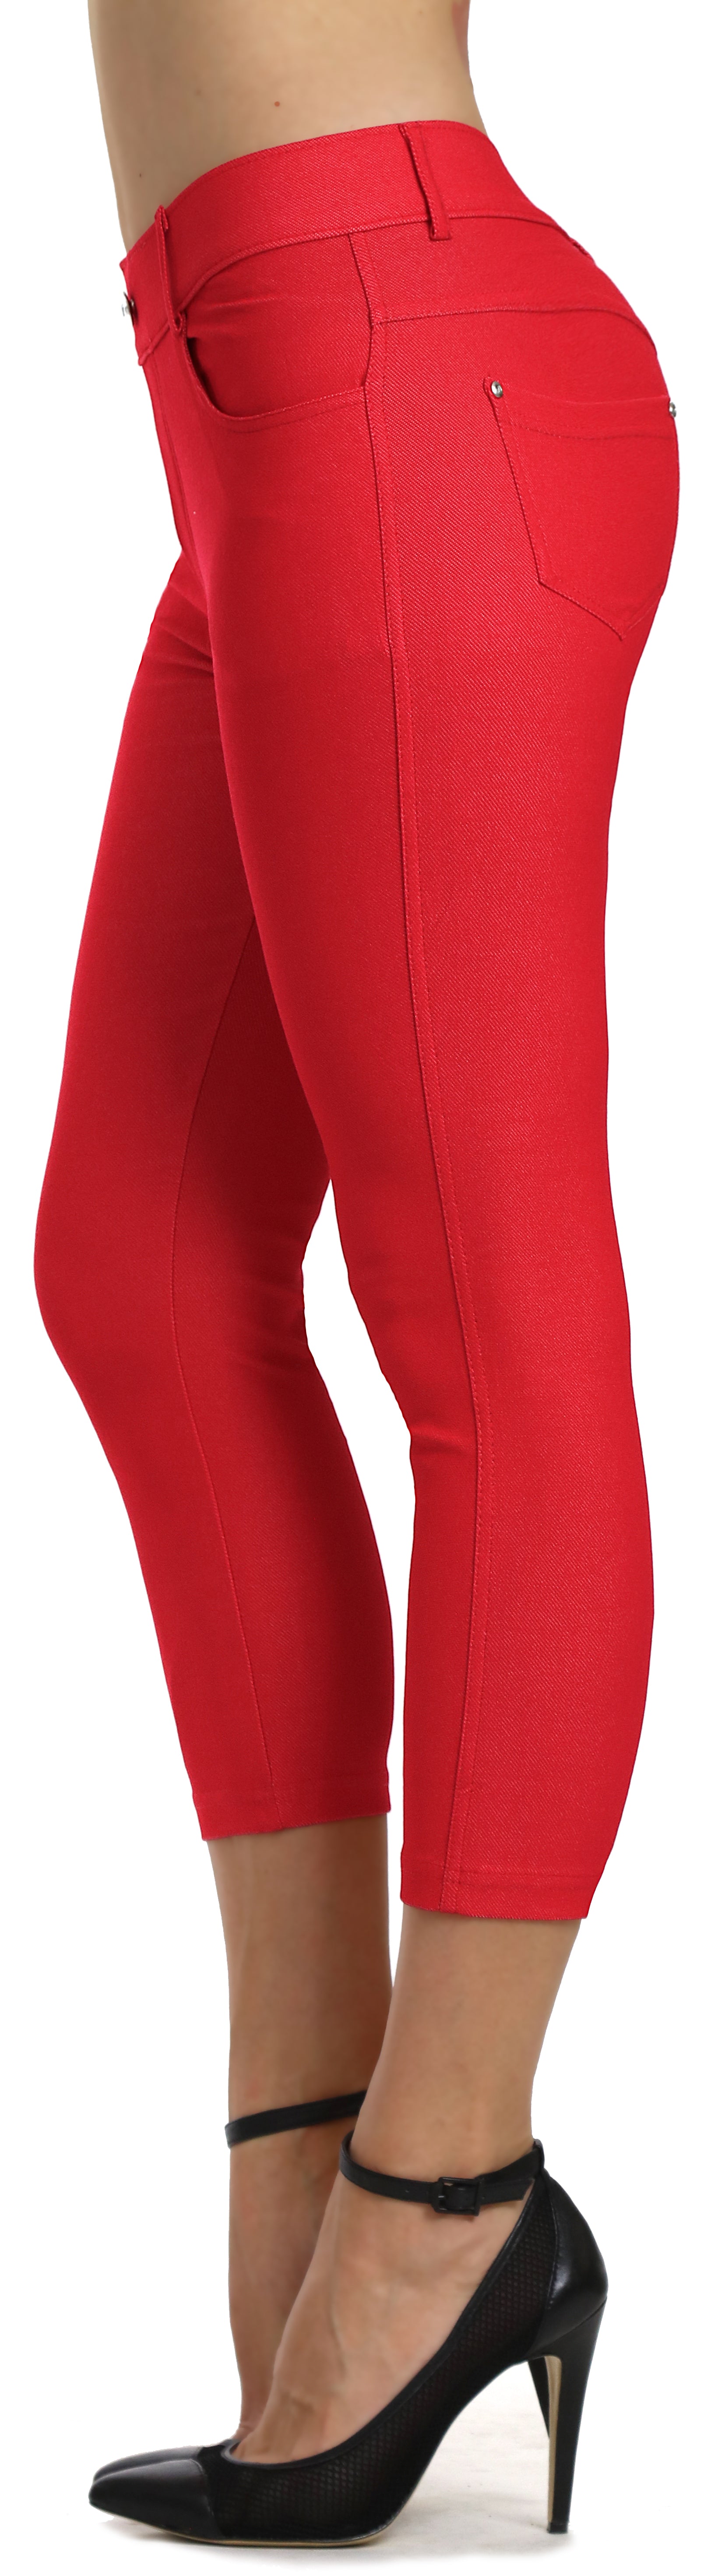 Time and Tru Women's Capri Jeggings X-Small (0-2) Coral Red NWT